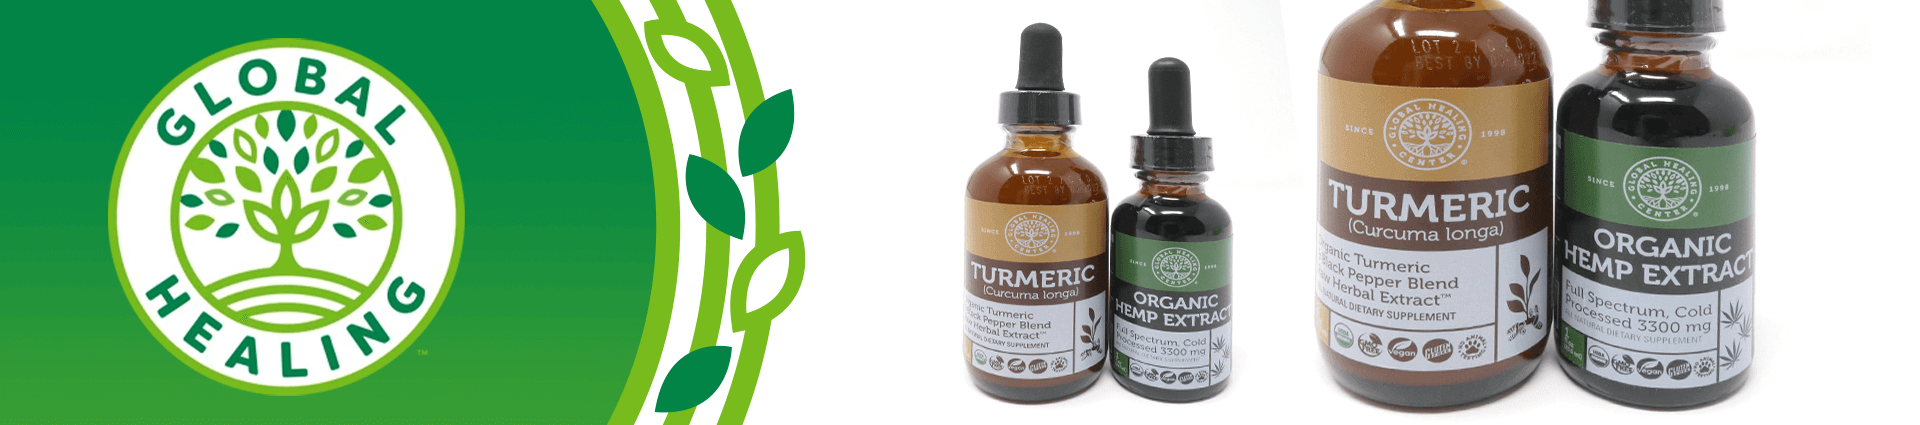 Global Healing CBD Products Banner